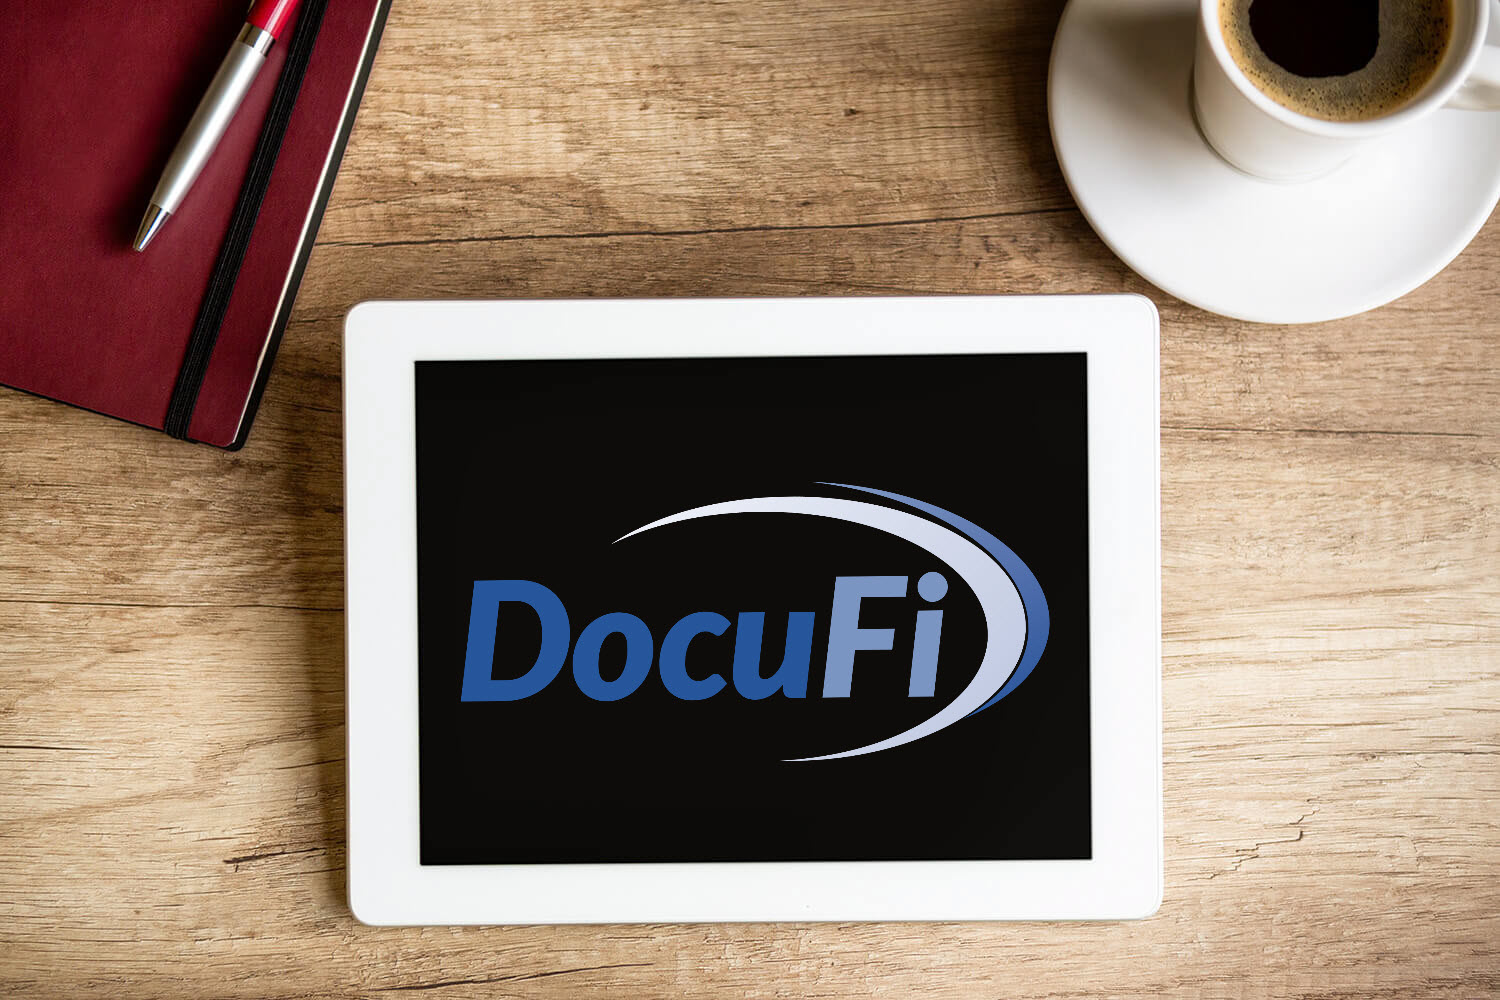 DocuFi makes automated document capture and processing software.